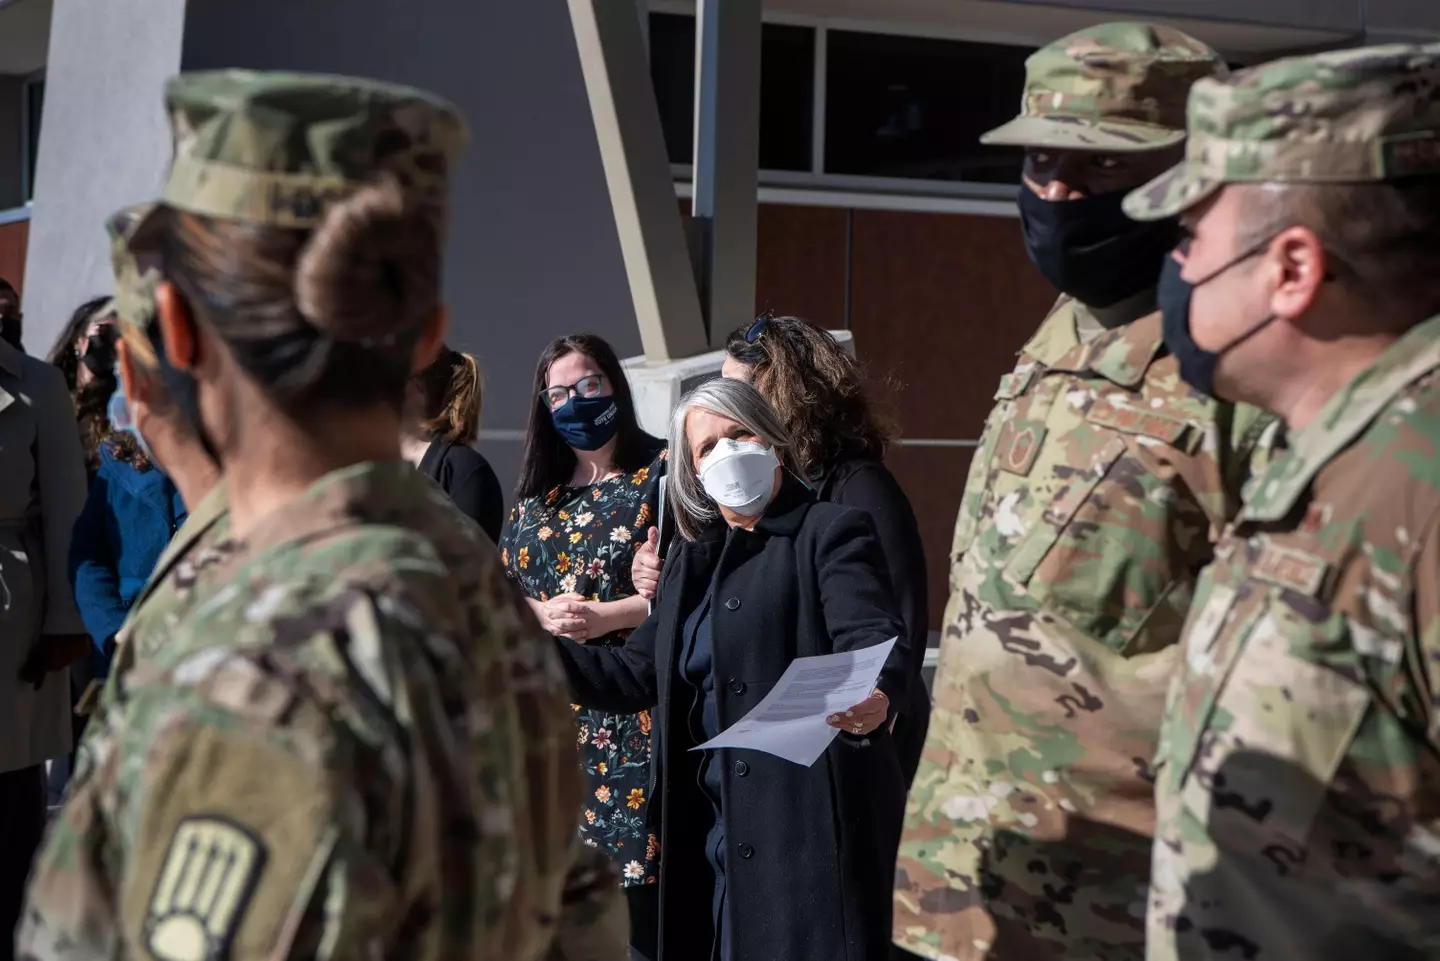 New Mexico Gov. Michelle Lujan Grisham has called on the National Guard. (Alamy)